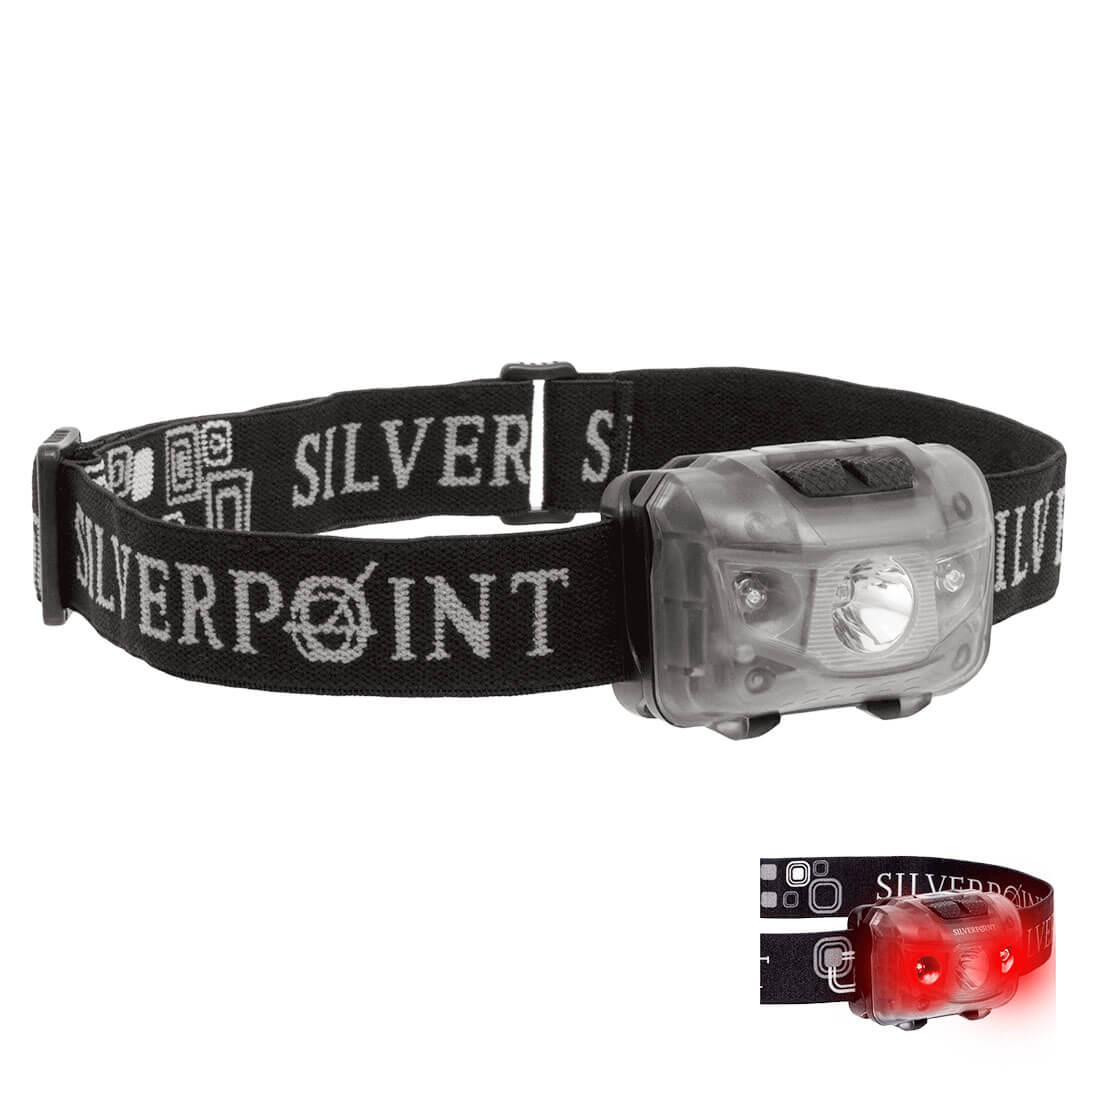 Silverpoint Hunter XL120RL Headtorch with Red Light - John Bull Clothing